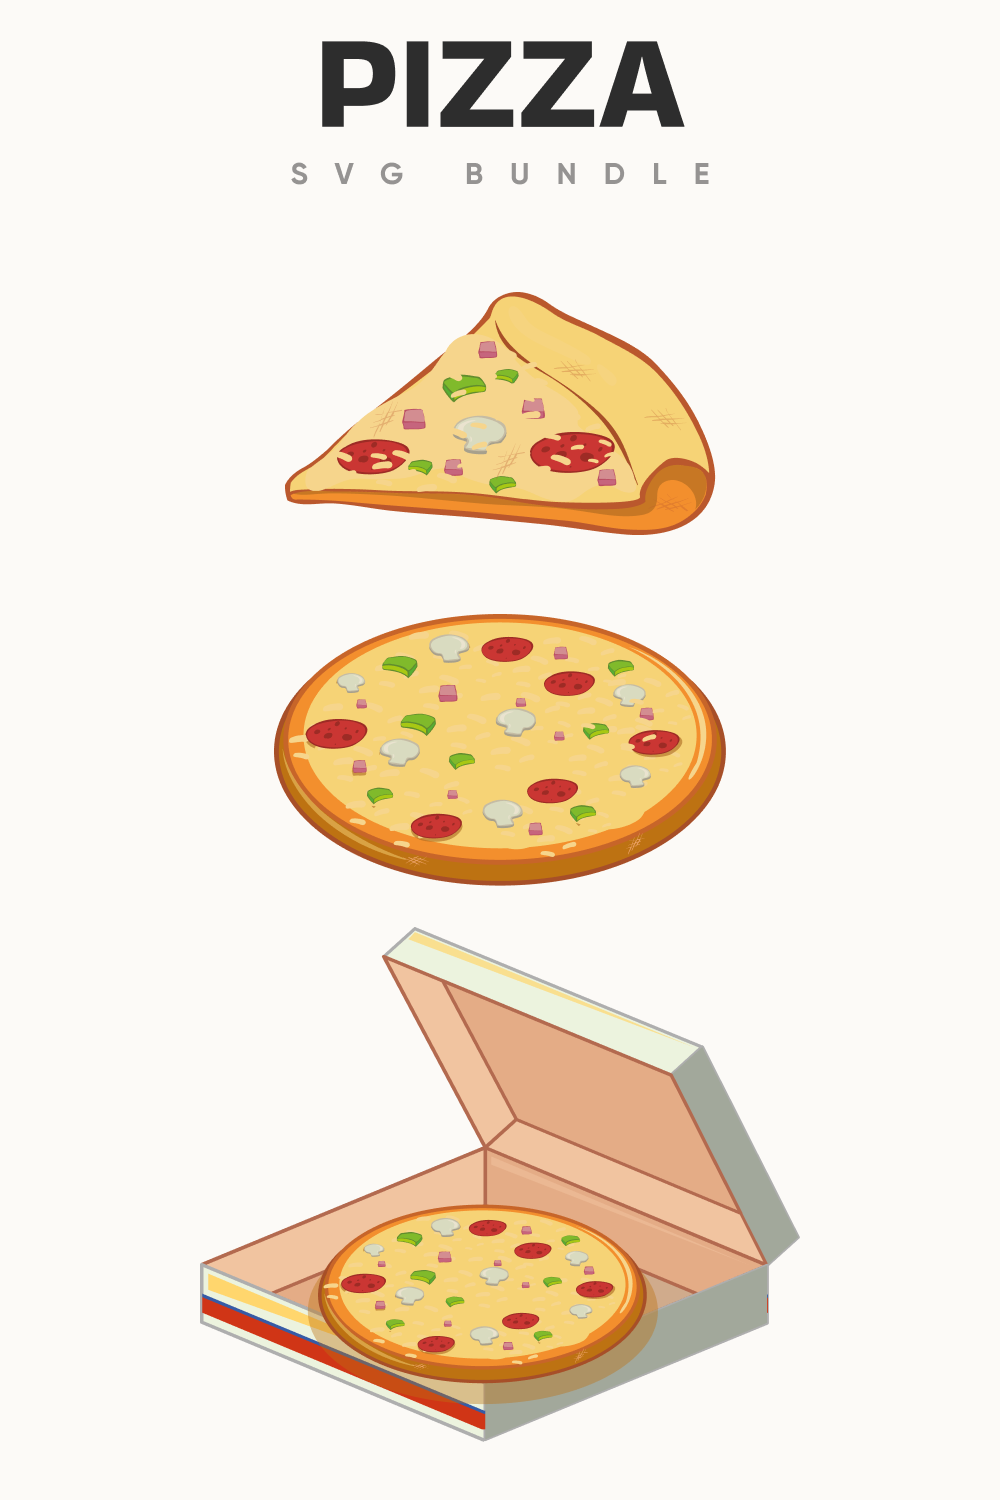 Thee options of the pizza.